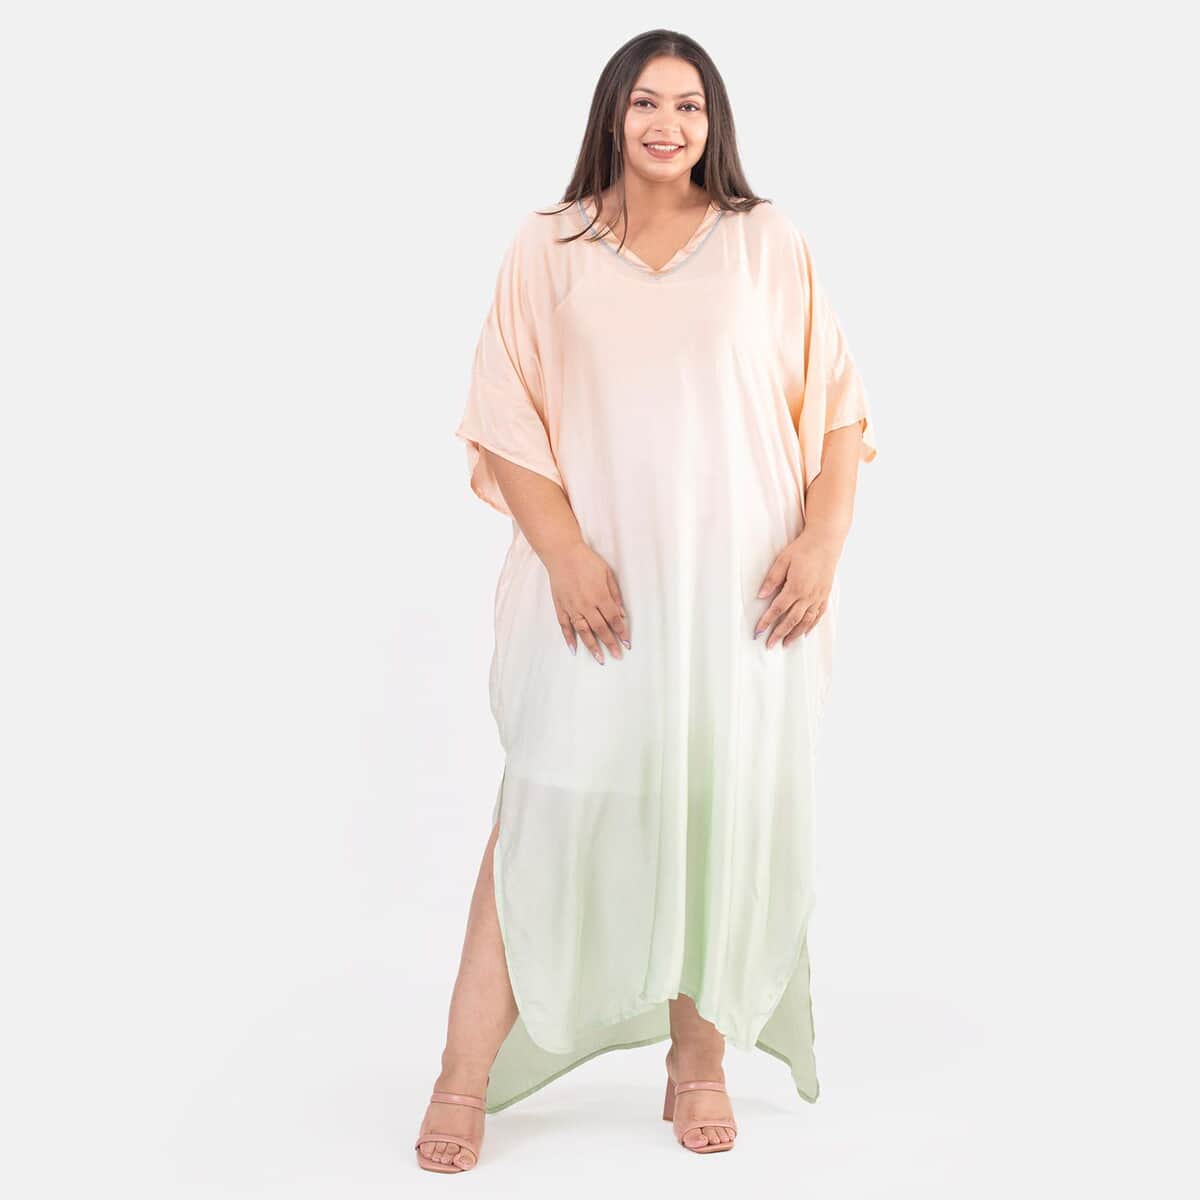 Tamsy Peach Bemberg Silk Ombre Dye V-Neck with Lace Long Kaftan - One Size Fits Most image number 0